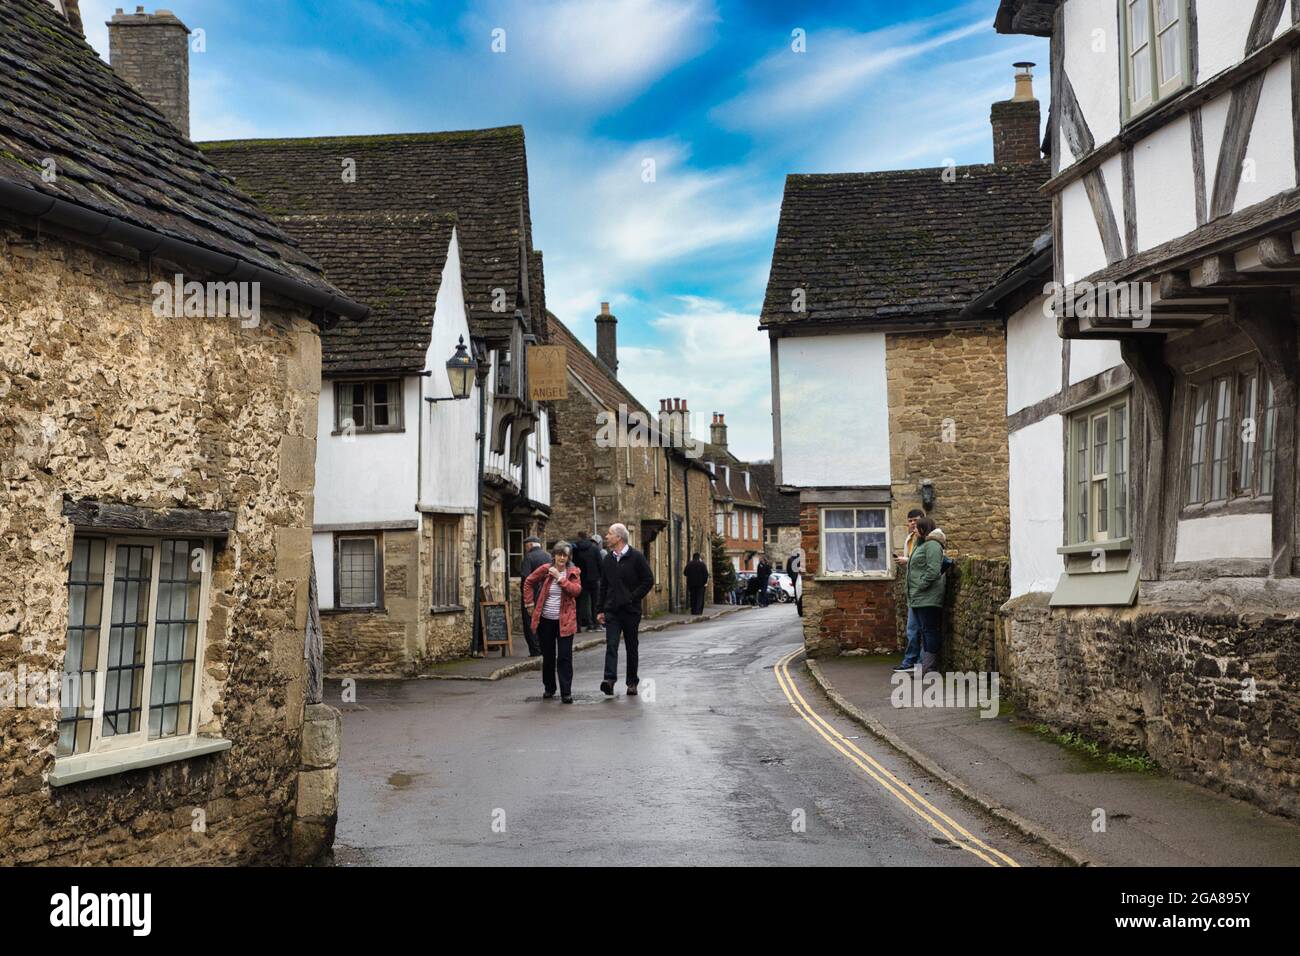 A street of lovely old gabled houses, typically English, in the village of Lacock, Wiltshire, England, UK Stock Photo